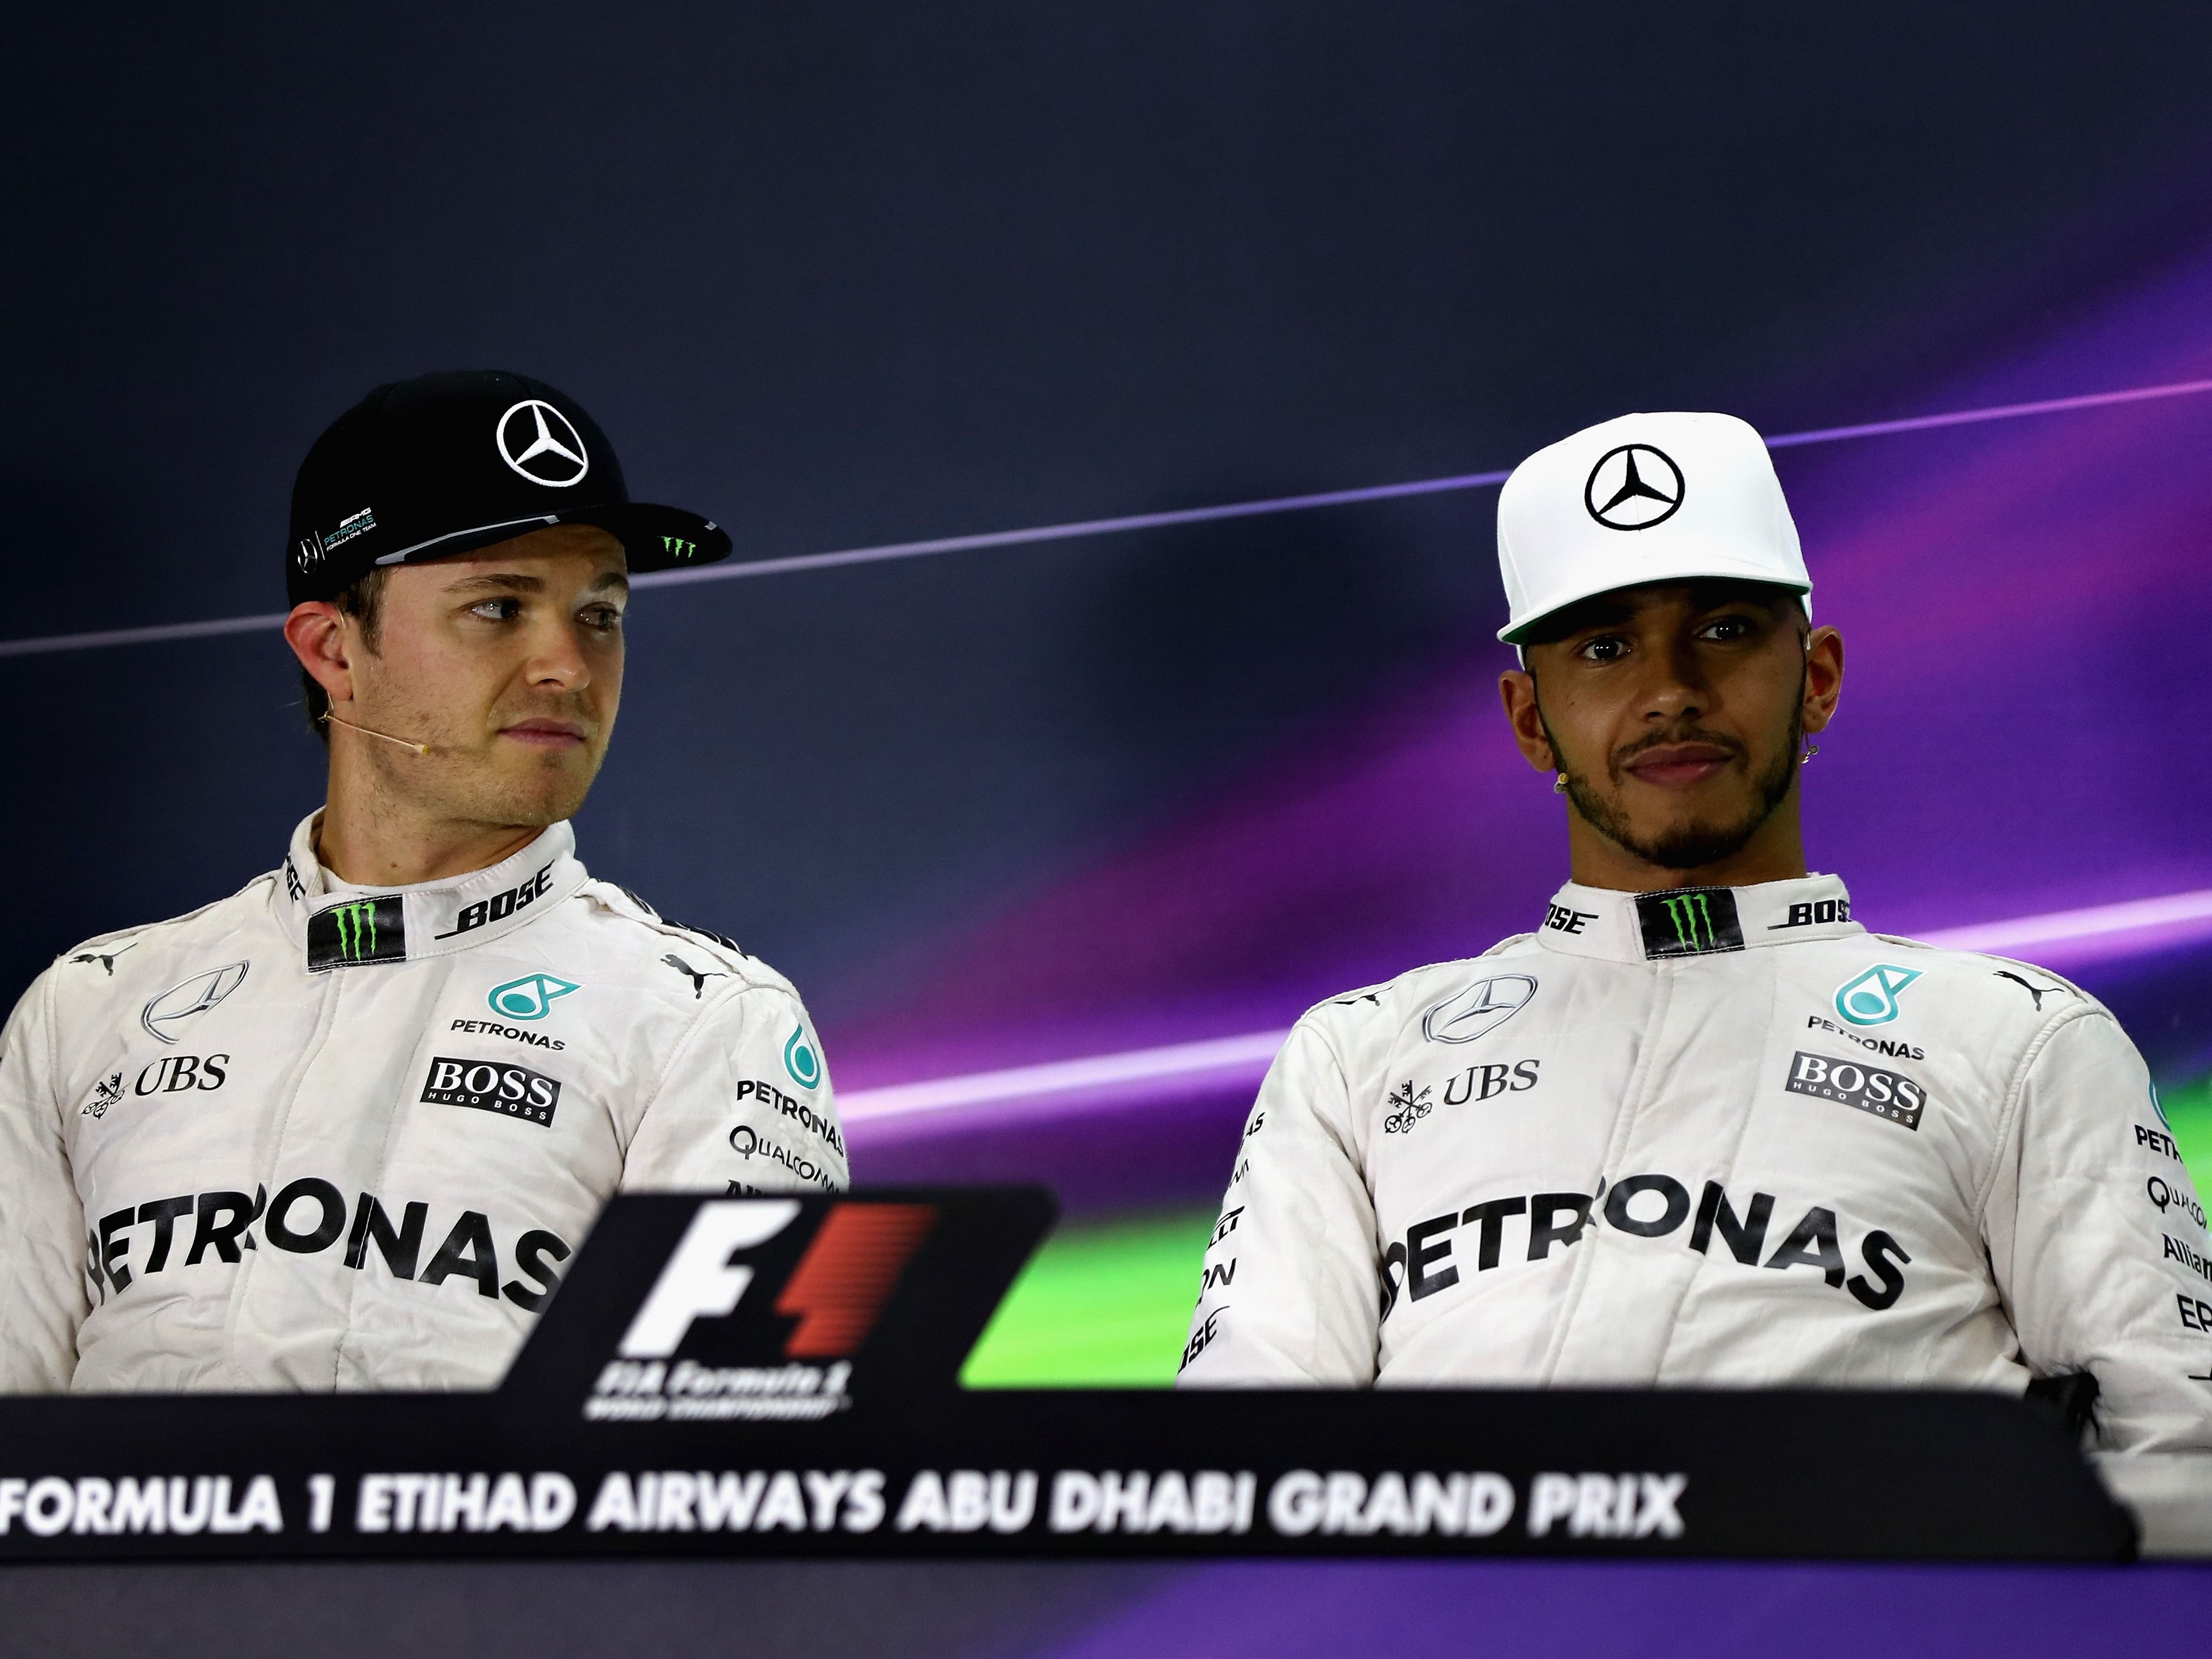 Lewis Hamilton and Nico Rosberg in the post qualifying press conference for the 2016 F1 Abu Dhabi Grand Prix. (Photo by Mark Thompson/Getty Images)